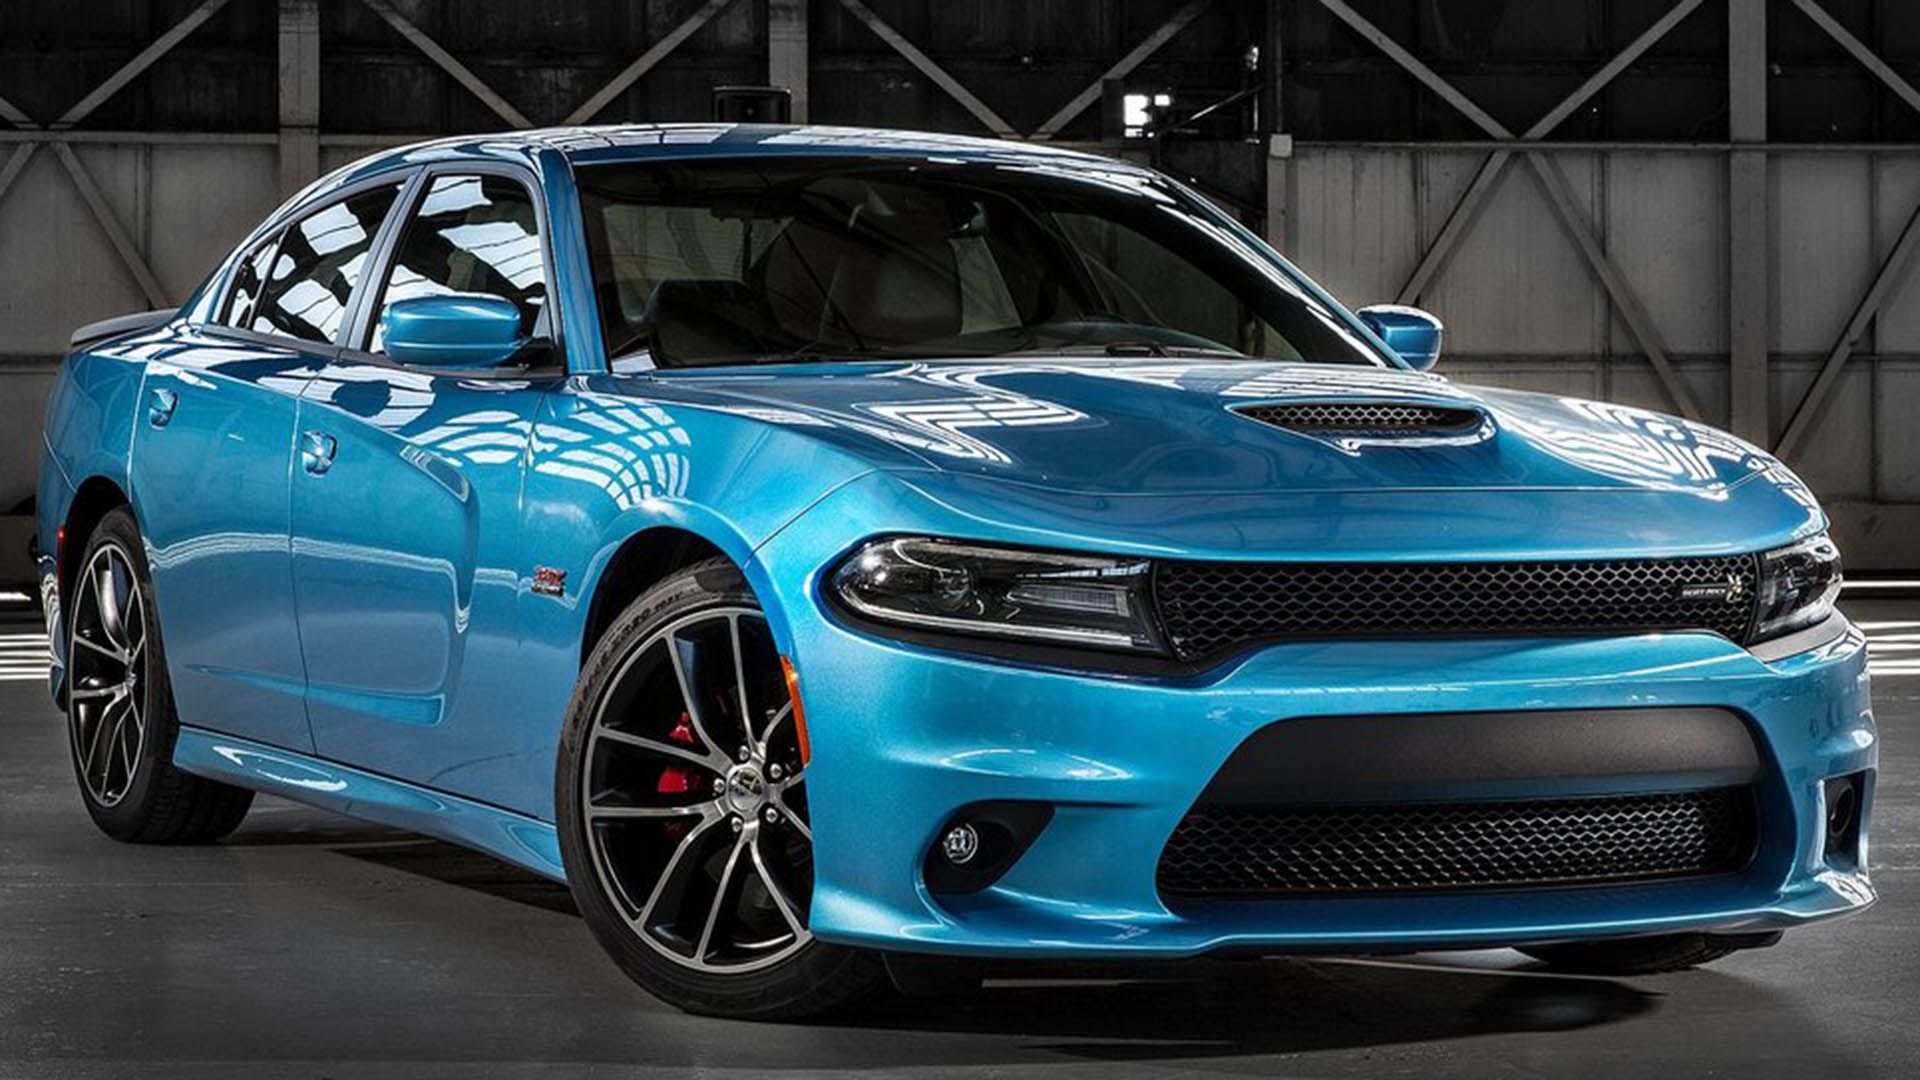 2015 Dodge-Charger 392 Scat Pack 1920x1080